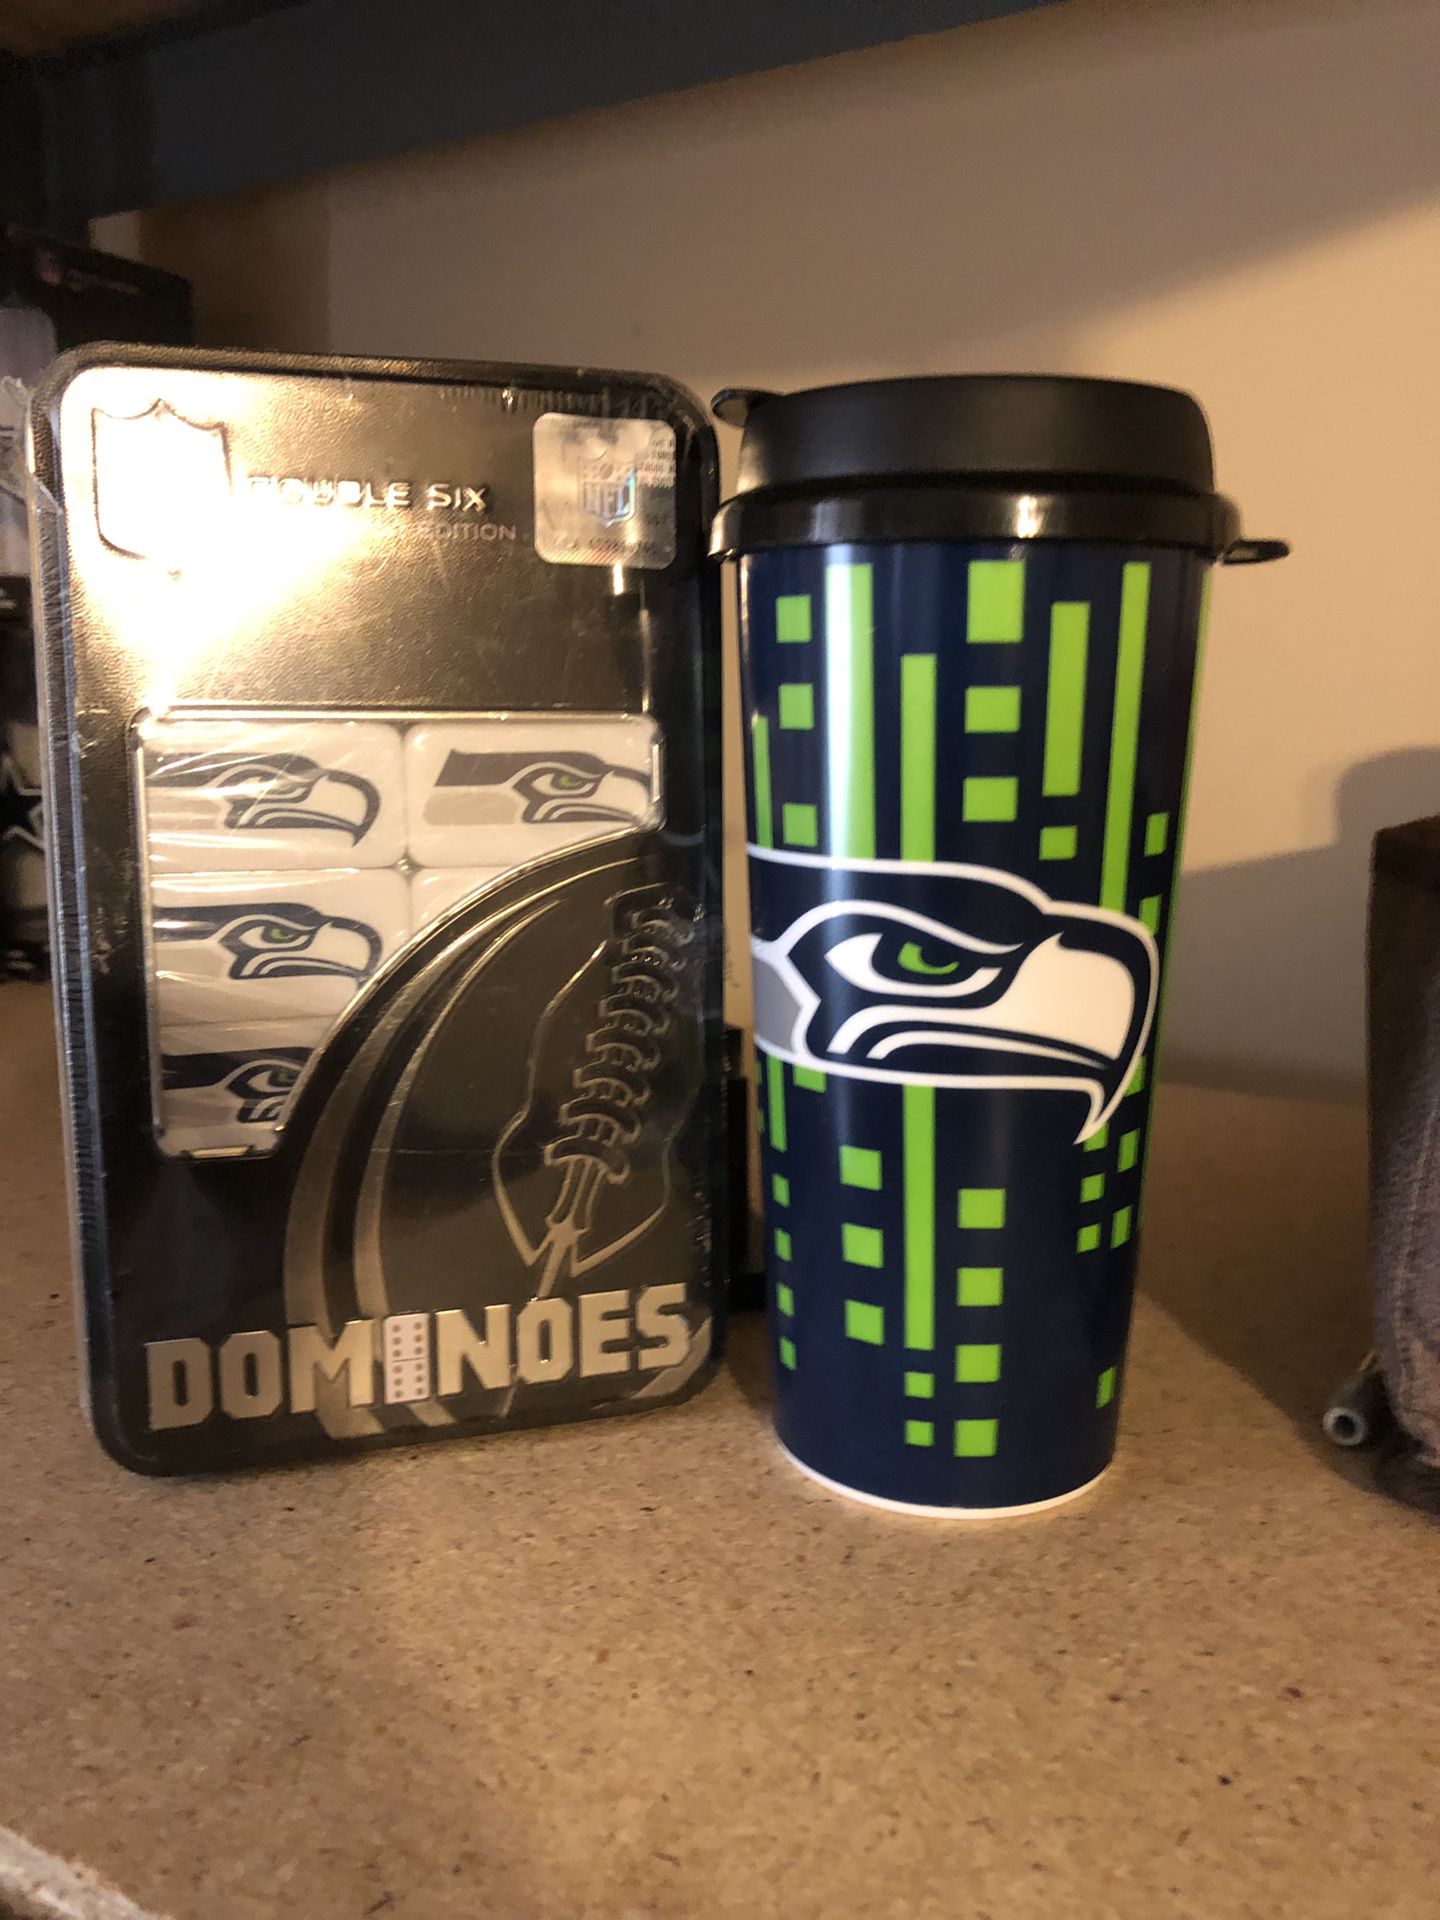 Seattle Seahawks double six dominoes and cup